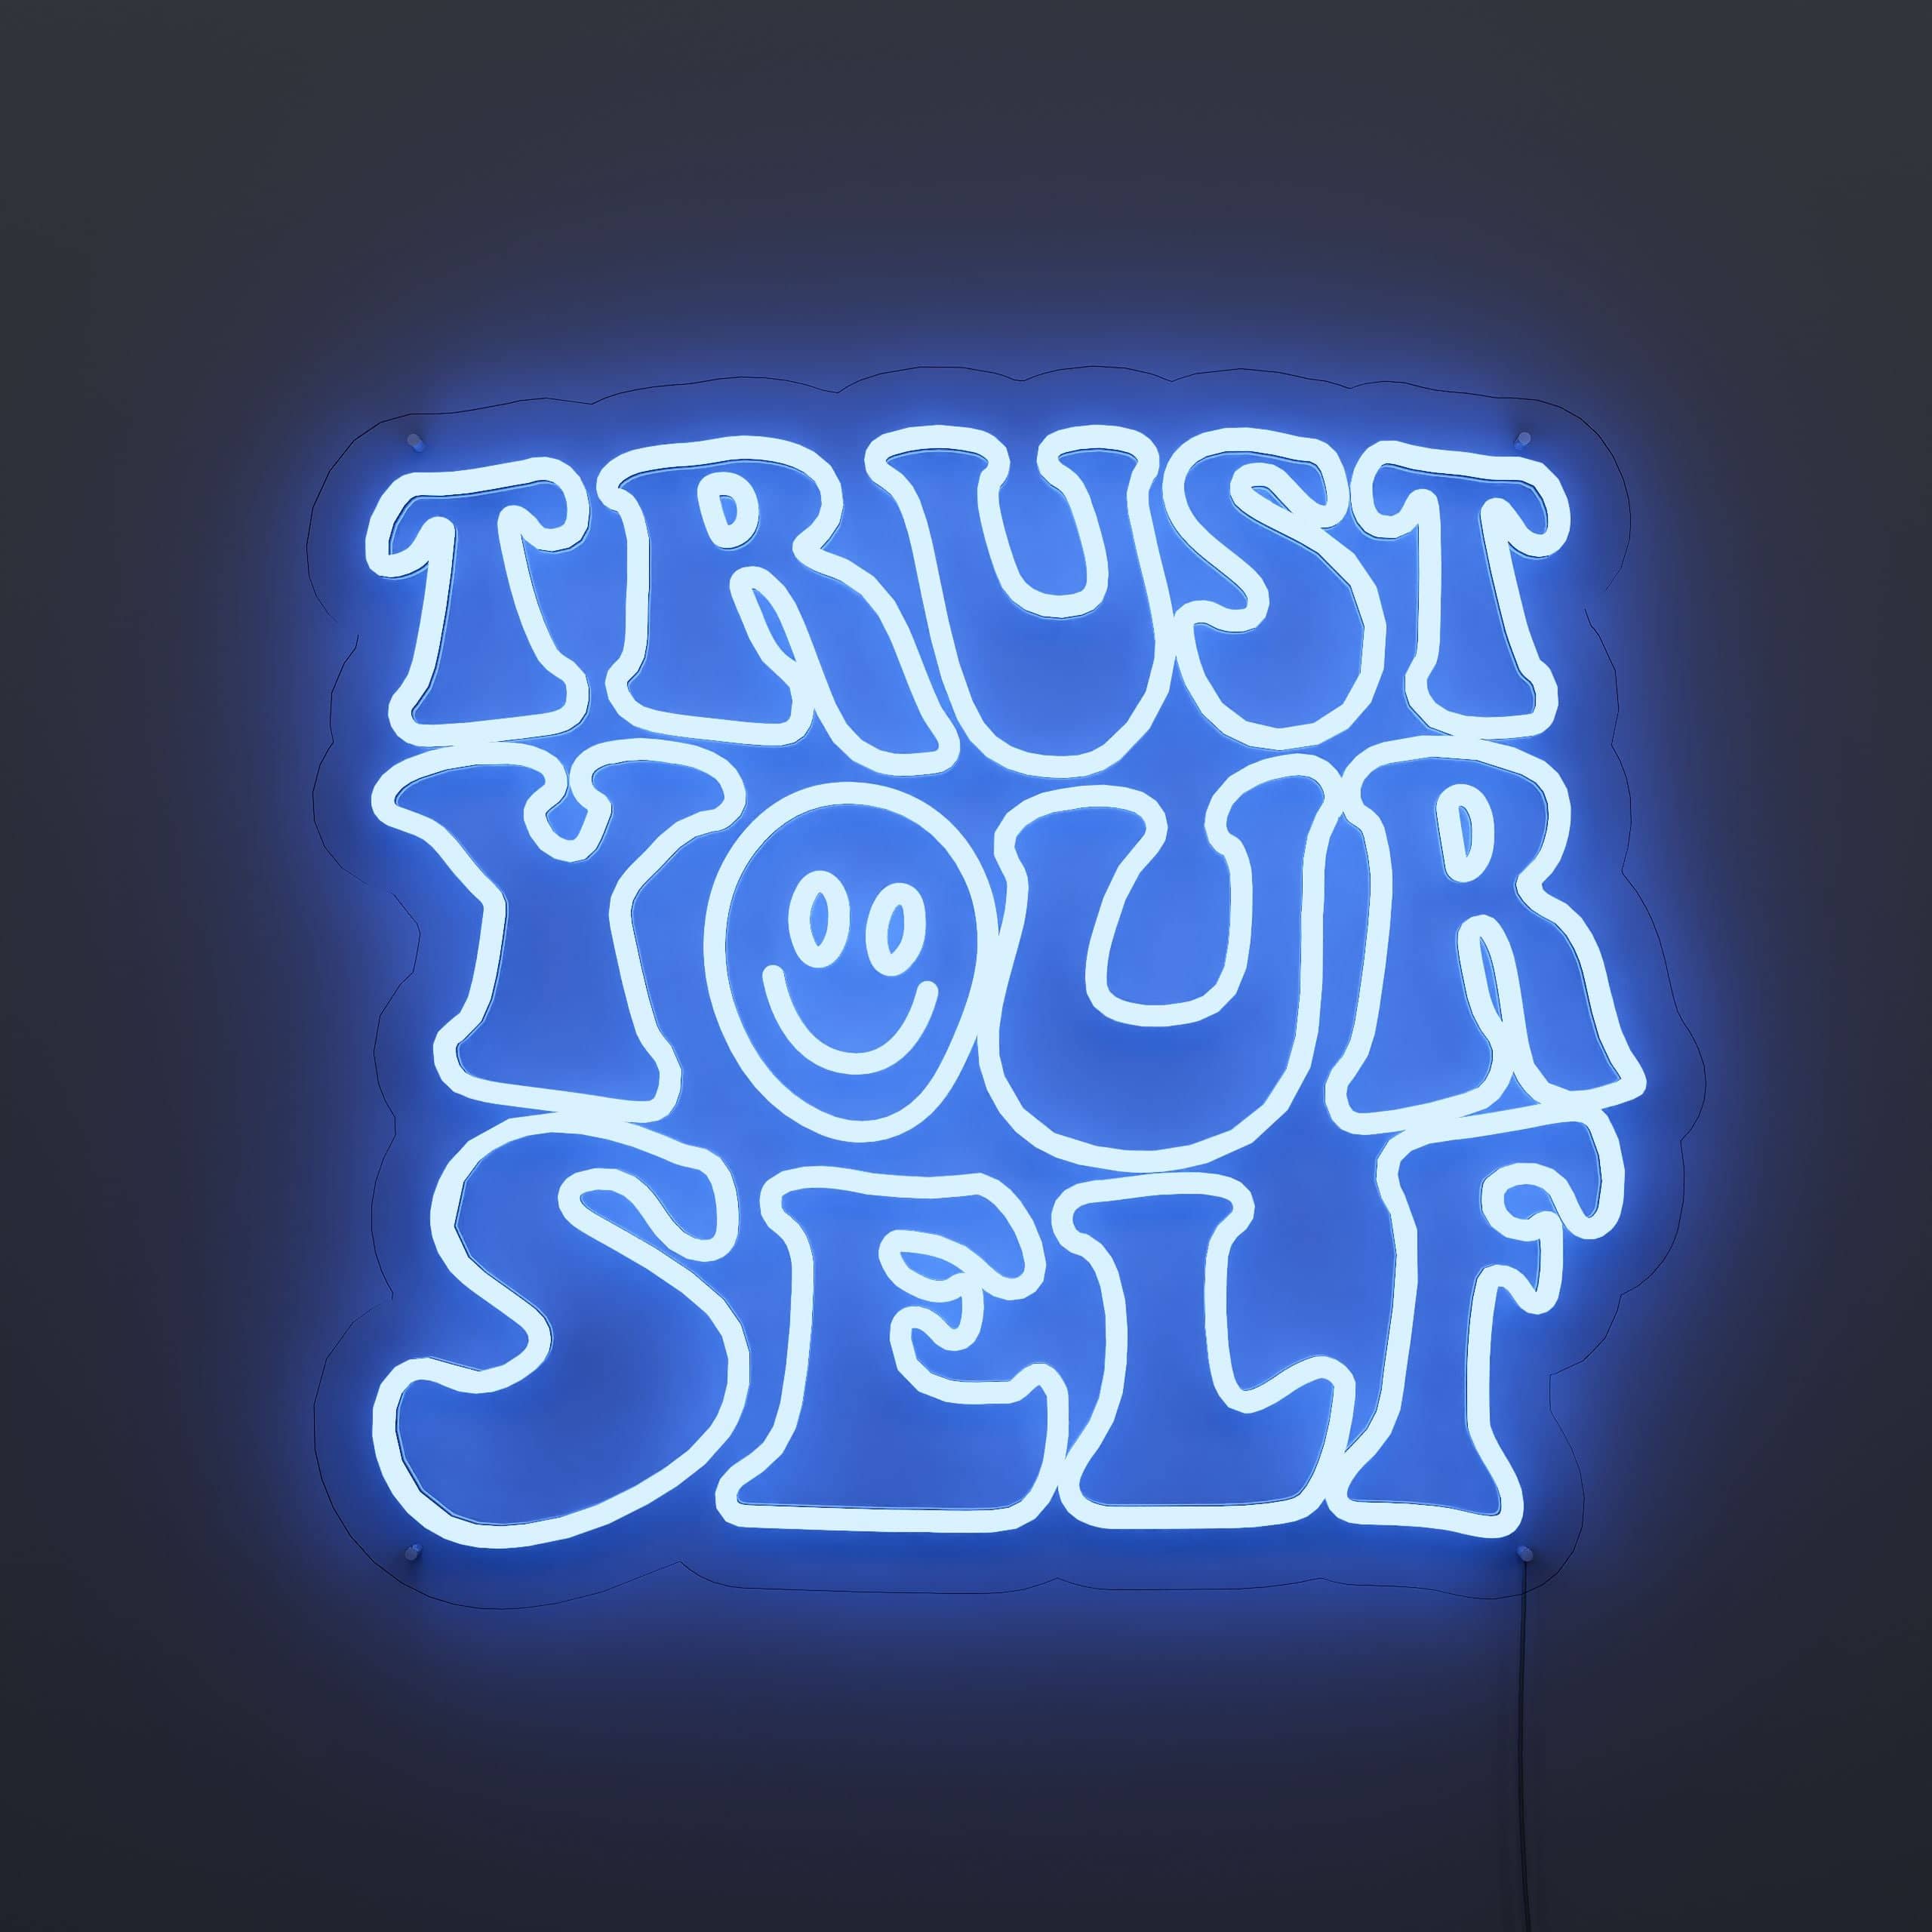 heed-your-own-counsel-neon-sign-lite